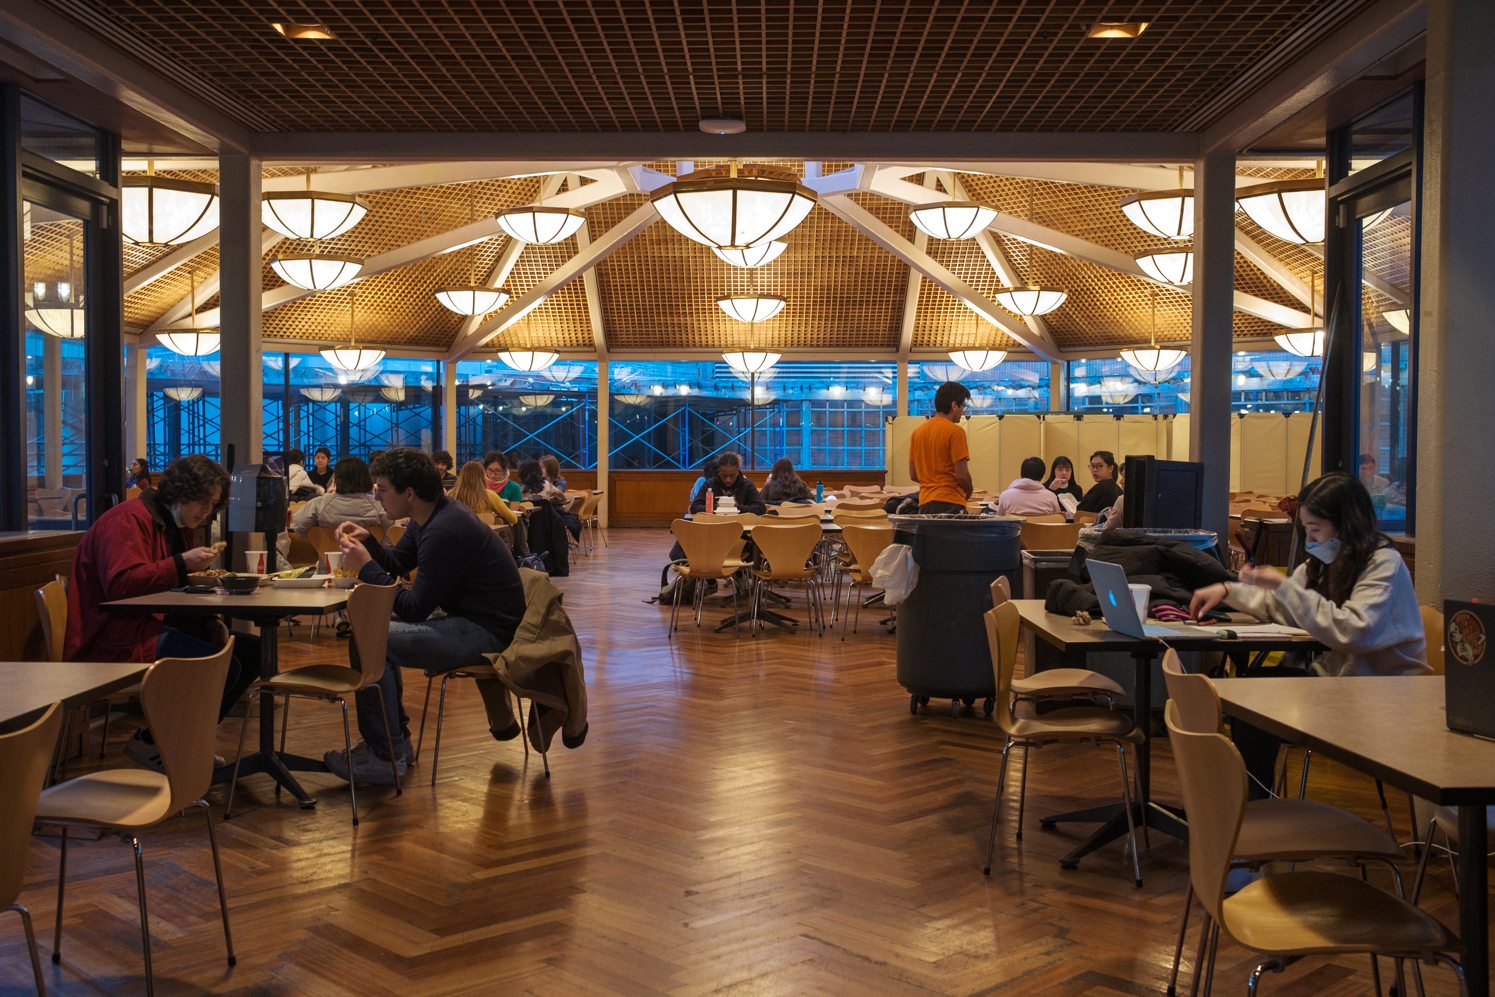 The Palladium dining hall with students shown eating.